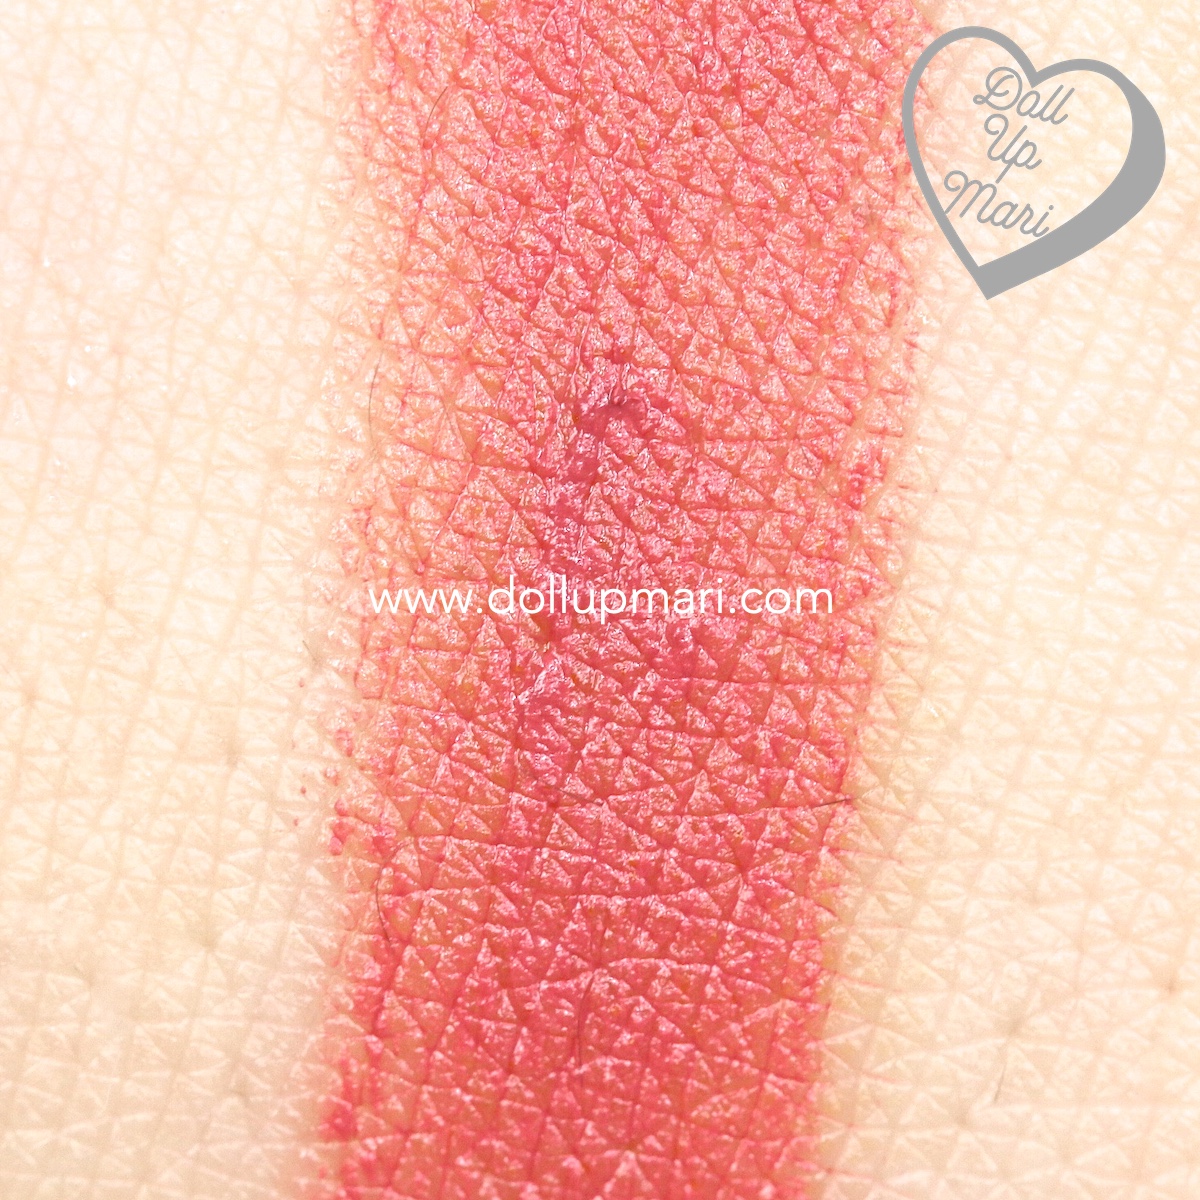 Swatch of Tempting Mauve shade of AVON Perfectly Matte Lipstick